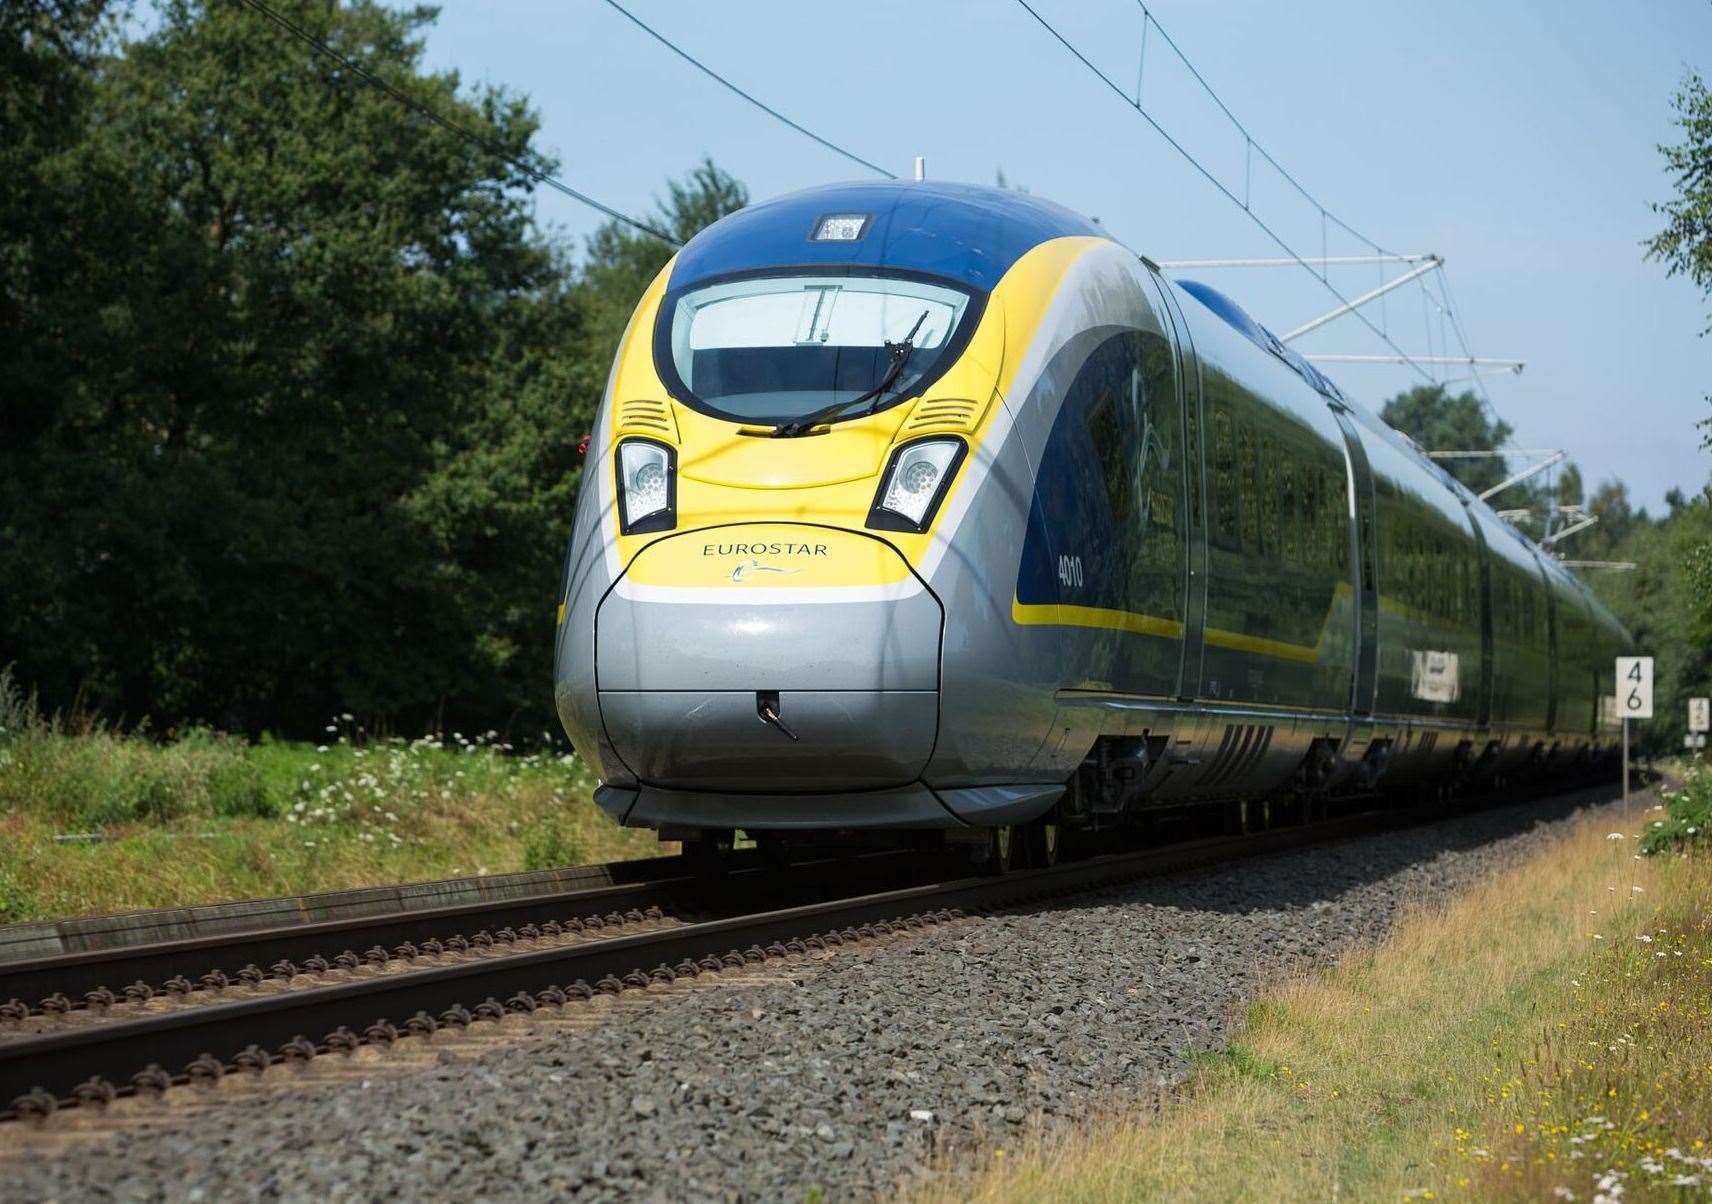 Will Eurostar one day face competition from another operator? Picture: Nathan Gallagher